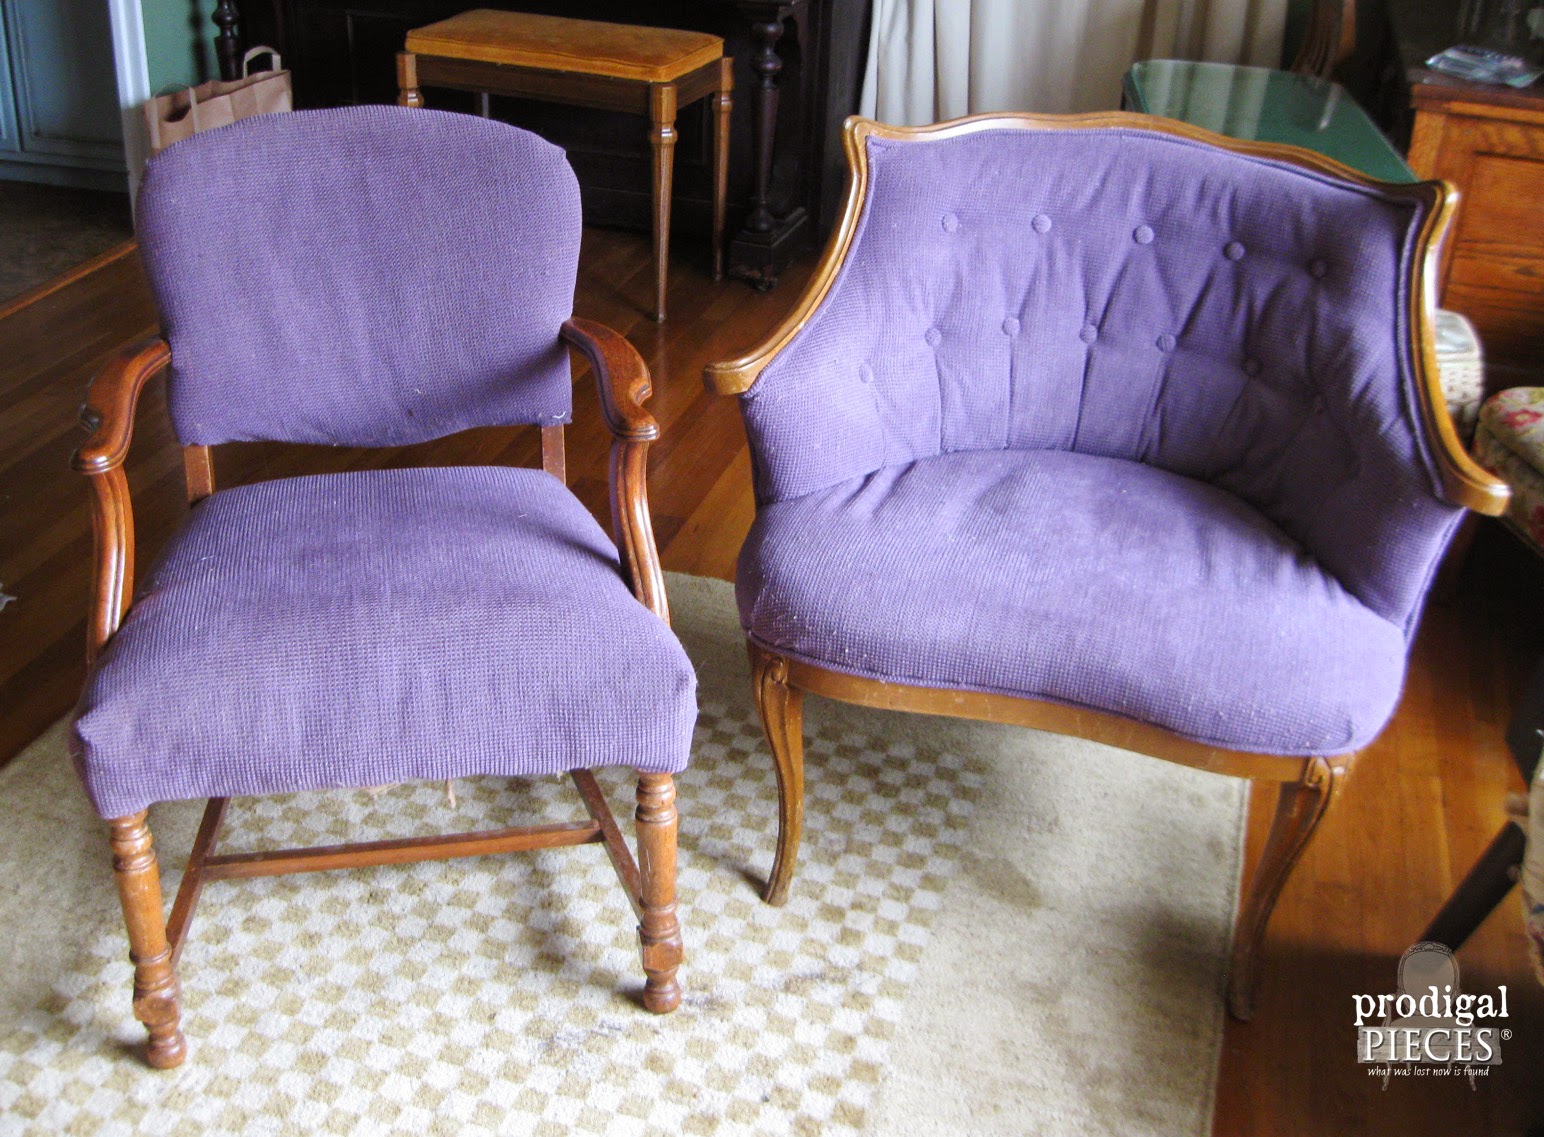 Vintage Chair Gets Feed Sack Makeover by Prodigal Pieces www.prodigalpieces.com #prodigalpieces